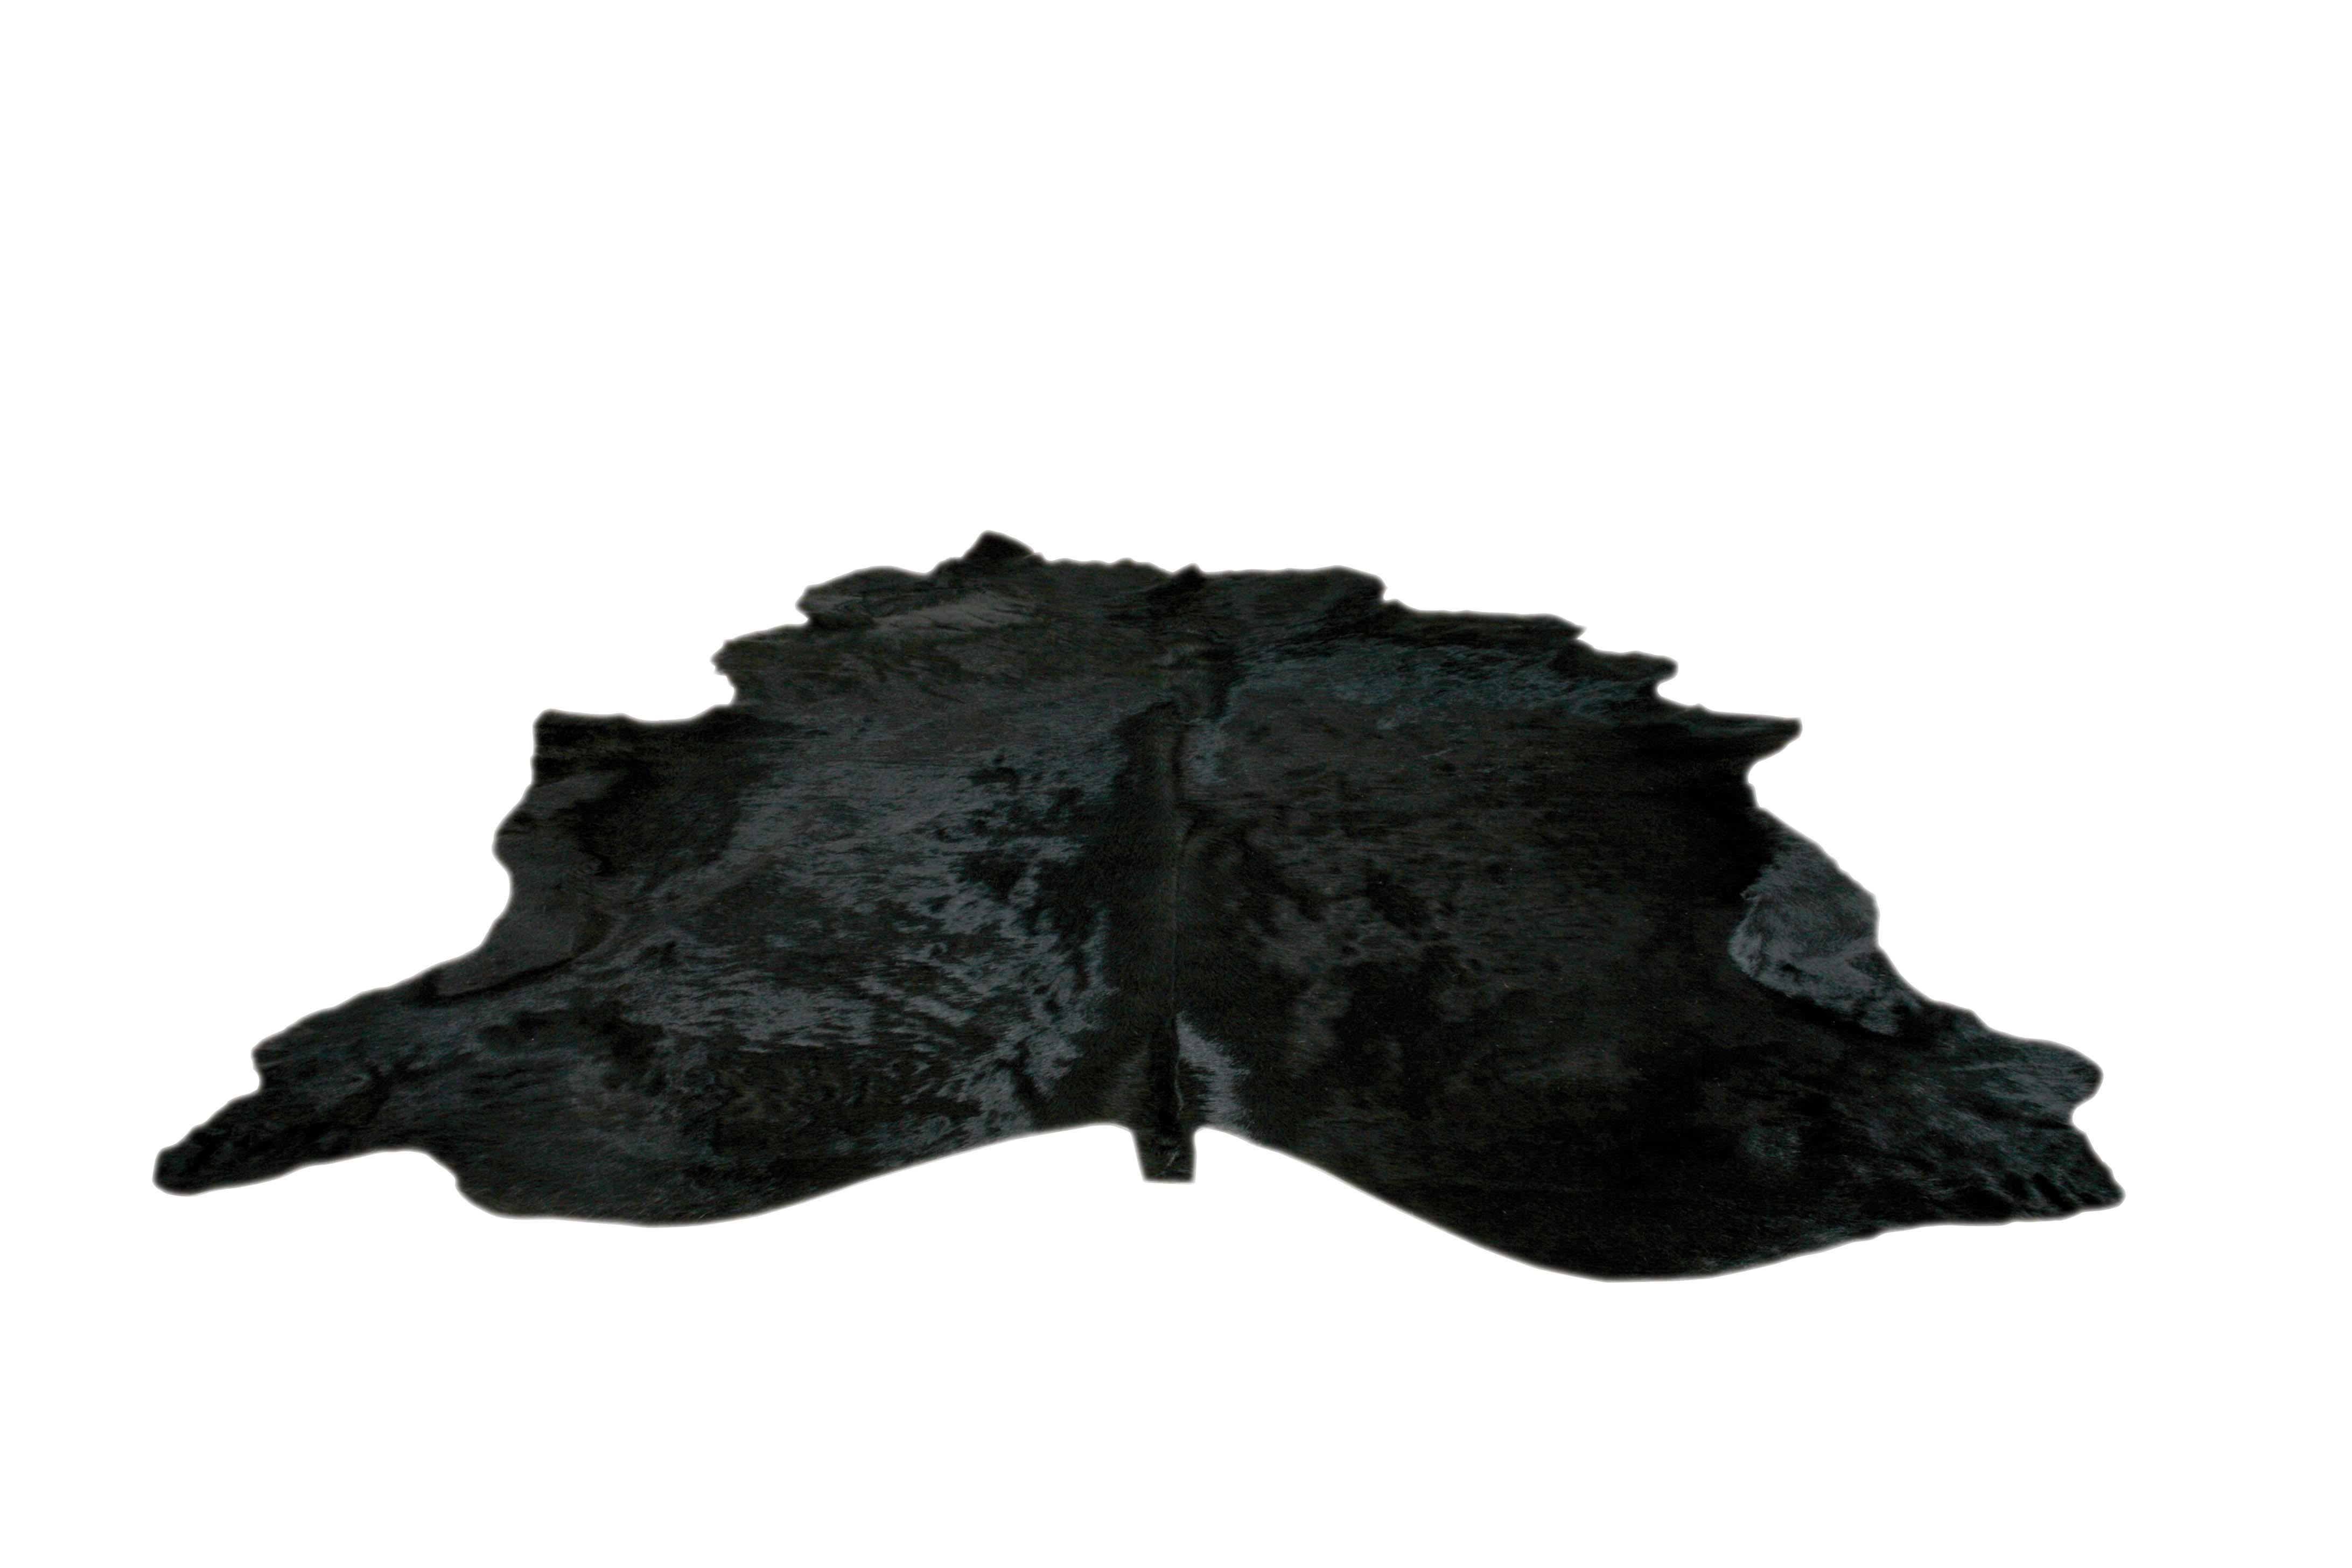 Black noir cowhide rug.

All of our hair cowhides are full hides and measure approximately 7' W x 8' L. They are of the highest quality from the French region of Normandy and naturally raised in a free roaming field. The hair of these cows is very